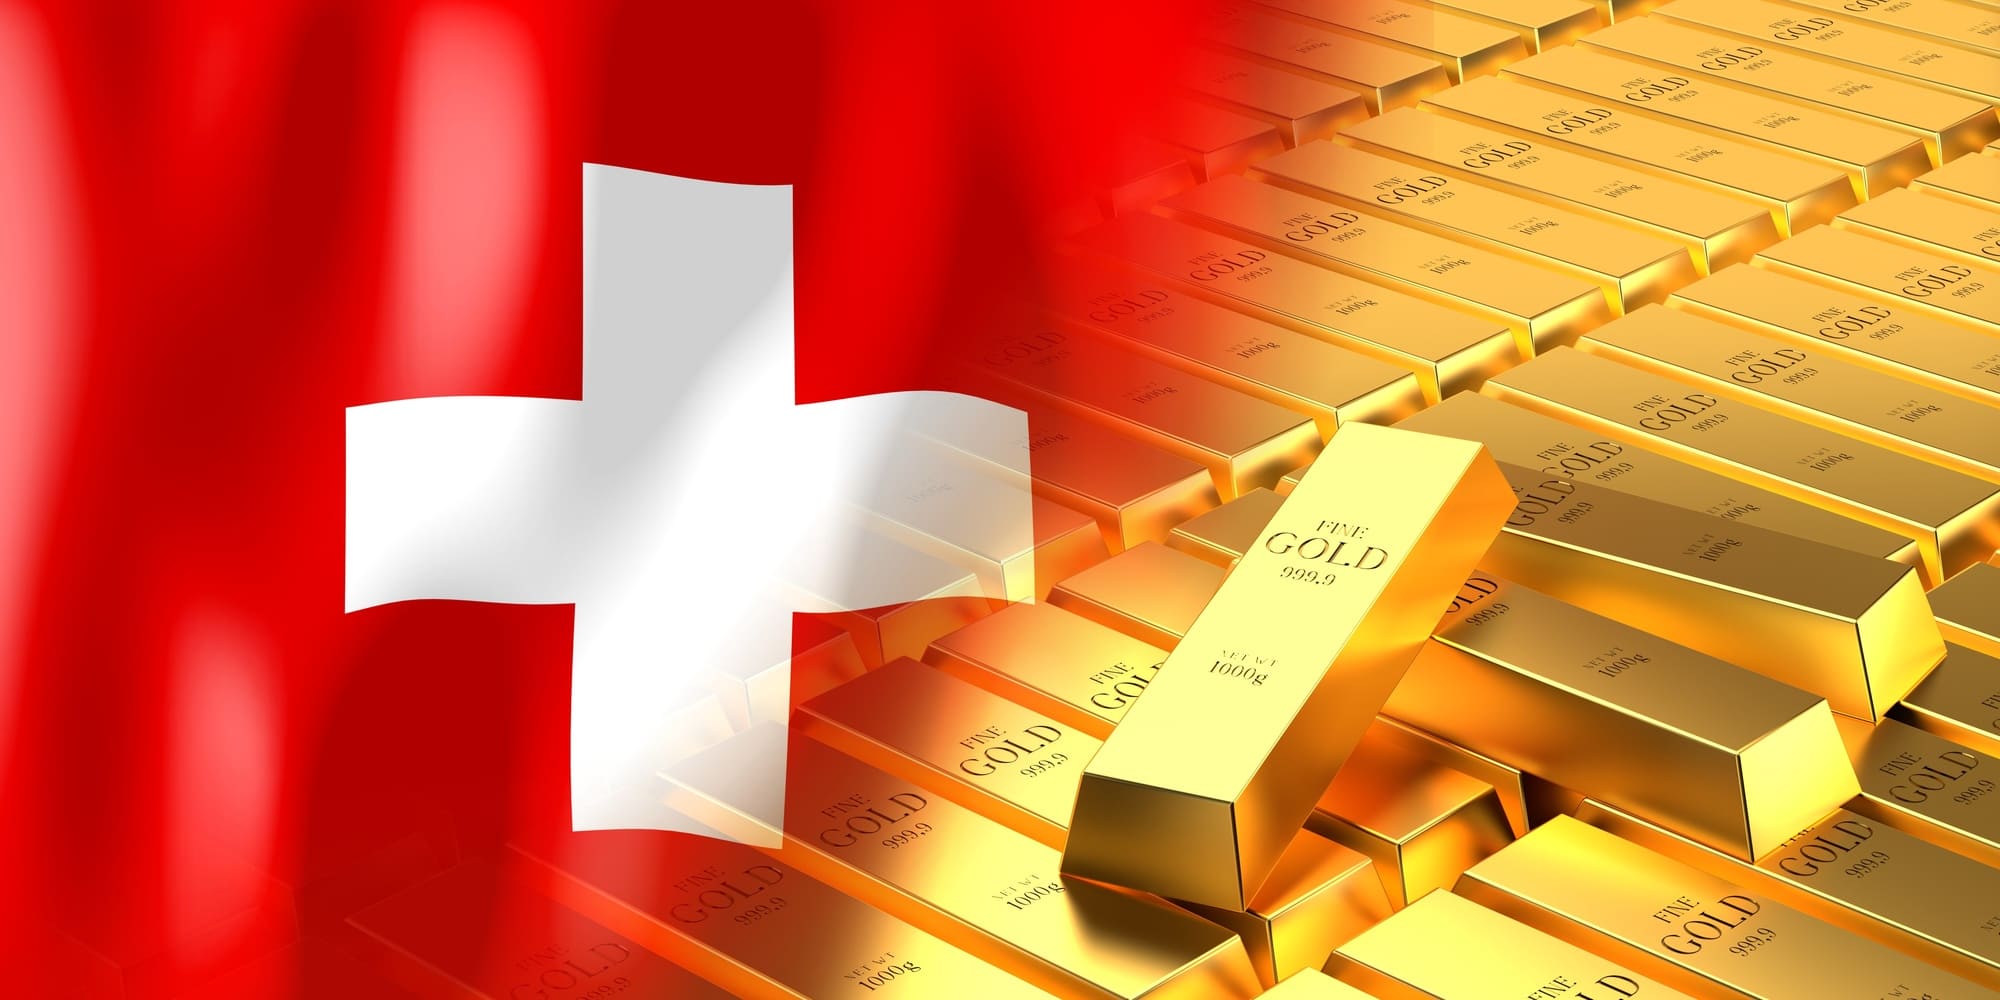 Swiss flag in front of a collection of gold bars